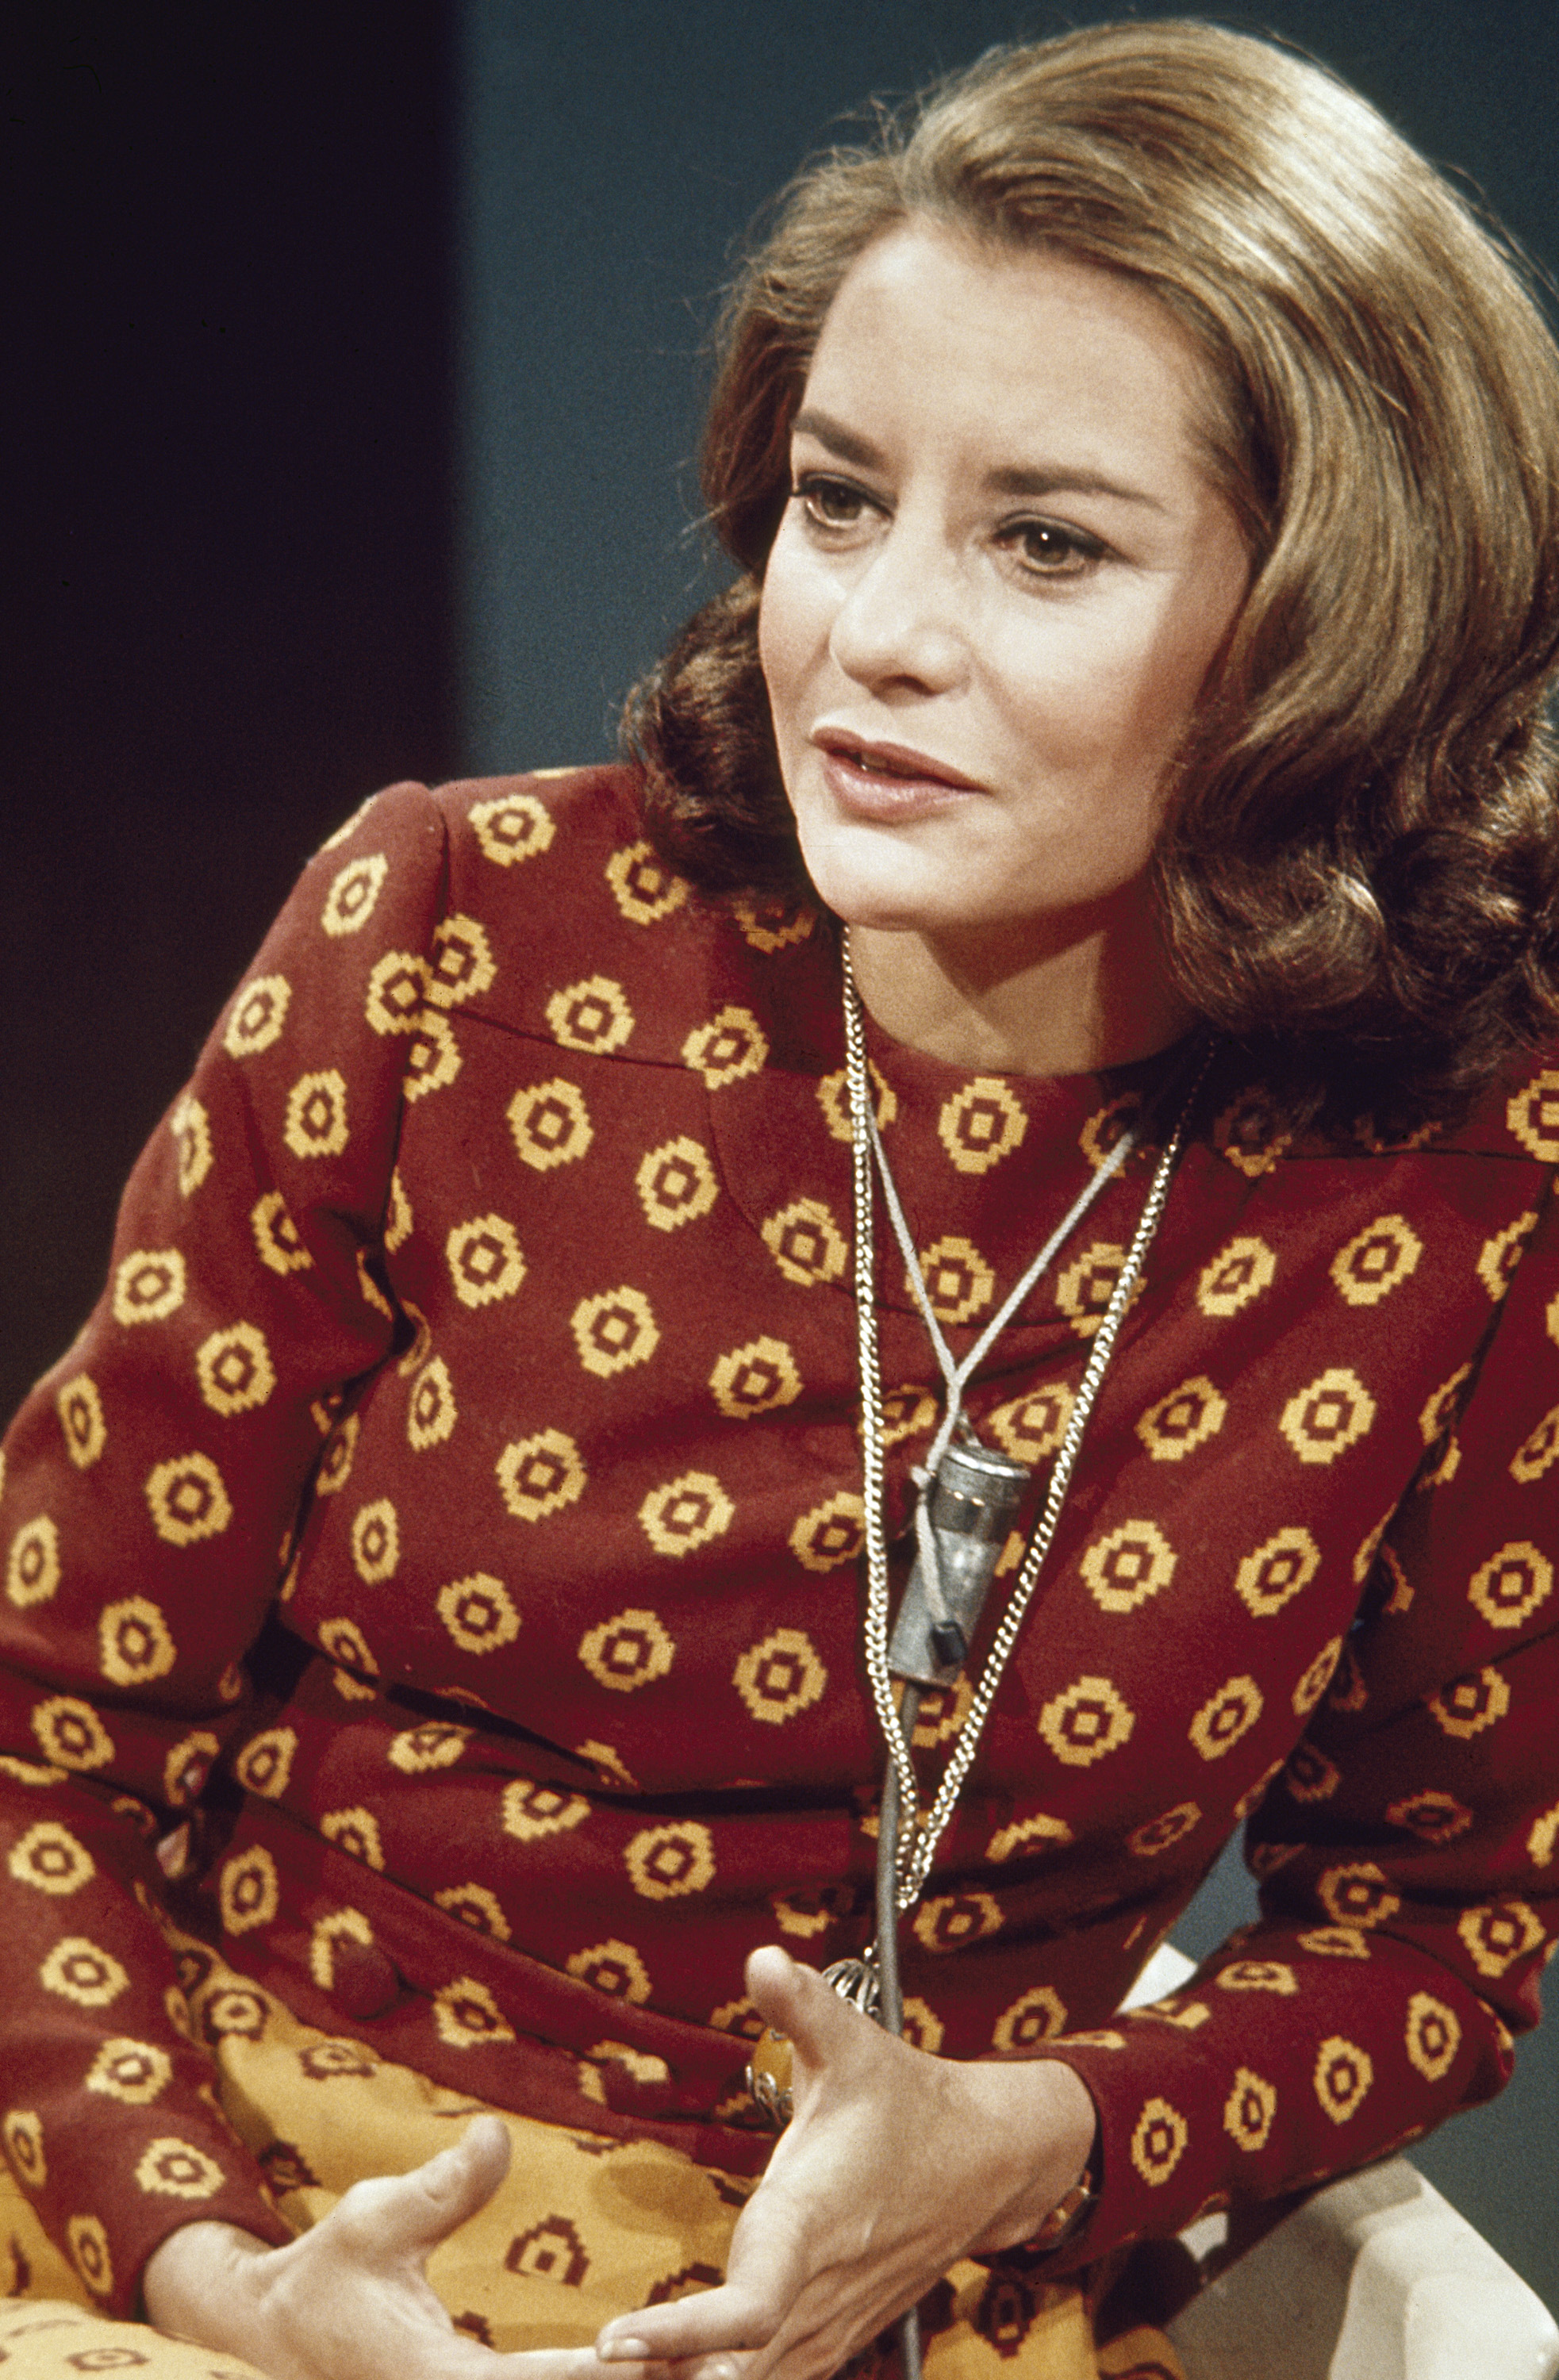 Barbara Walters during "Today" segment, circa 1970. | Source: Getty Images